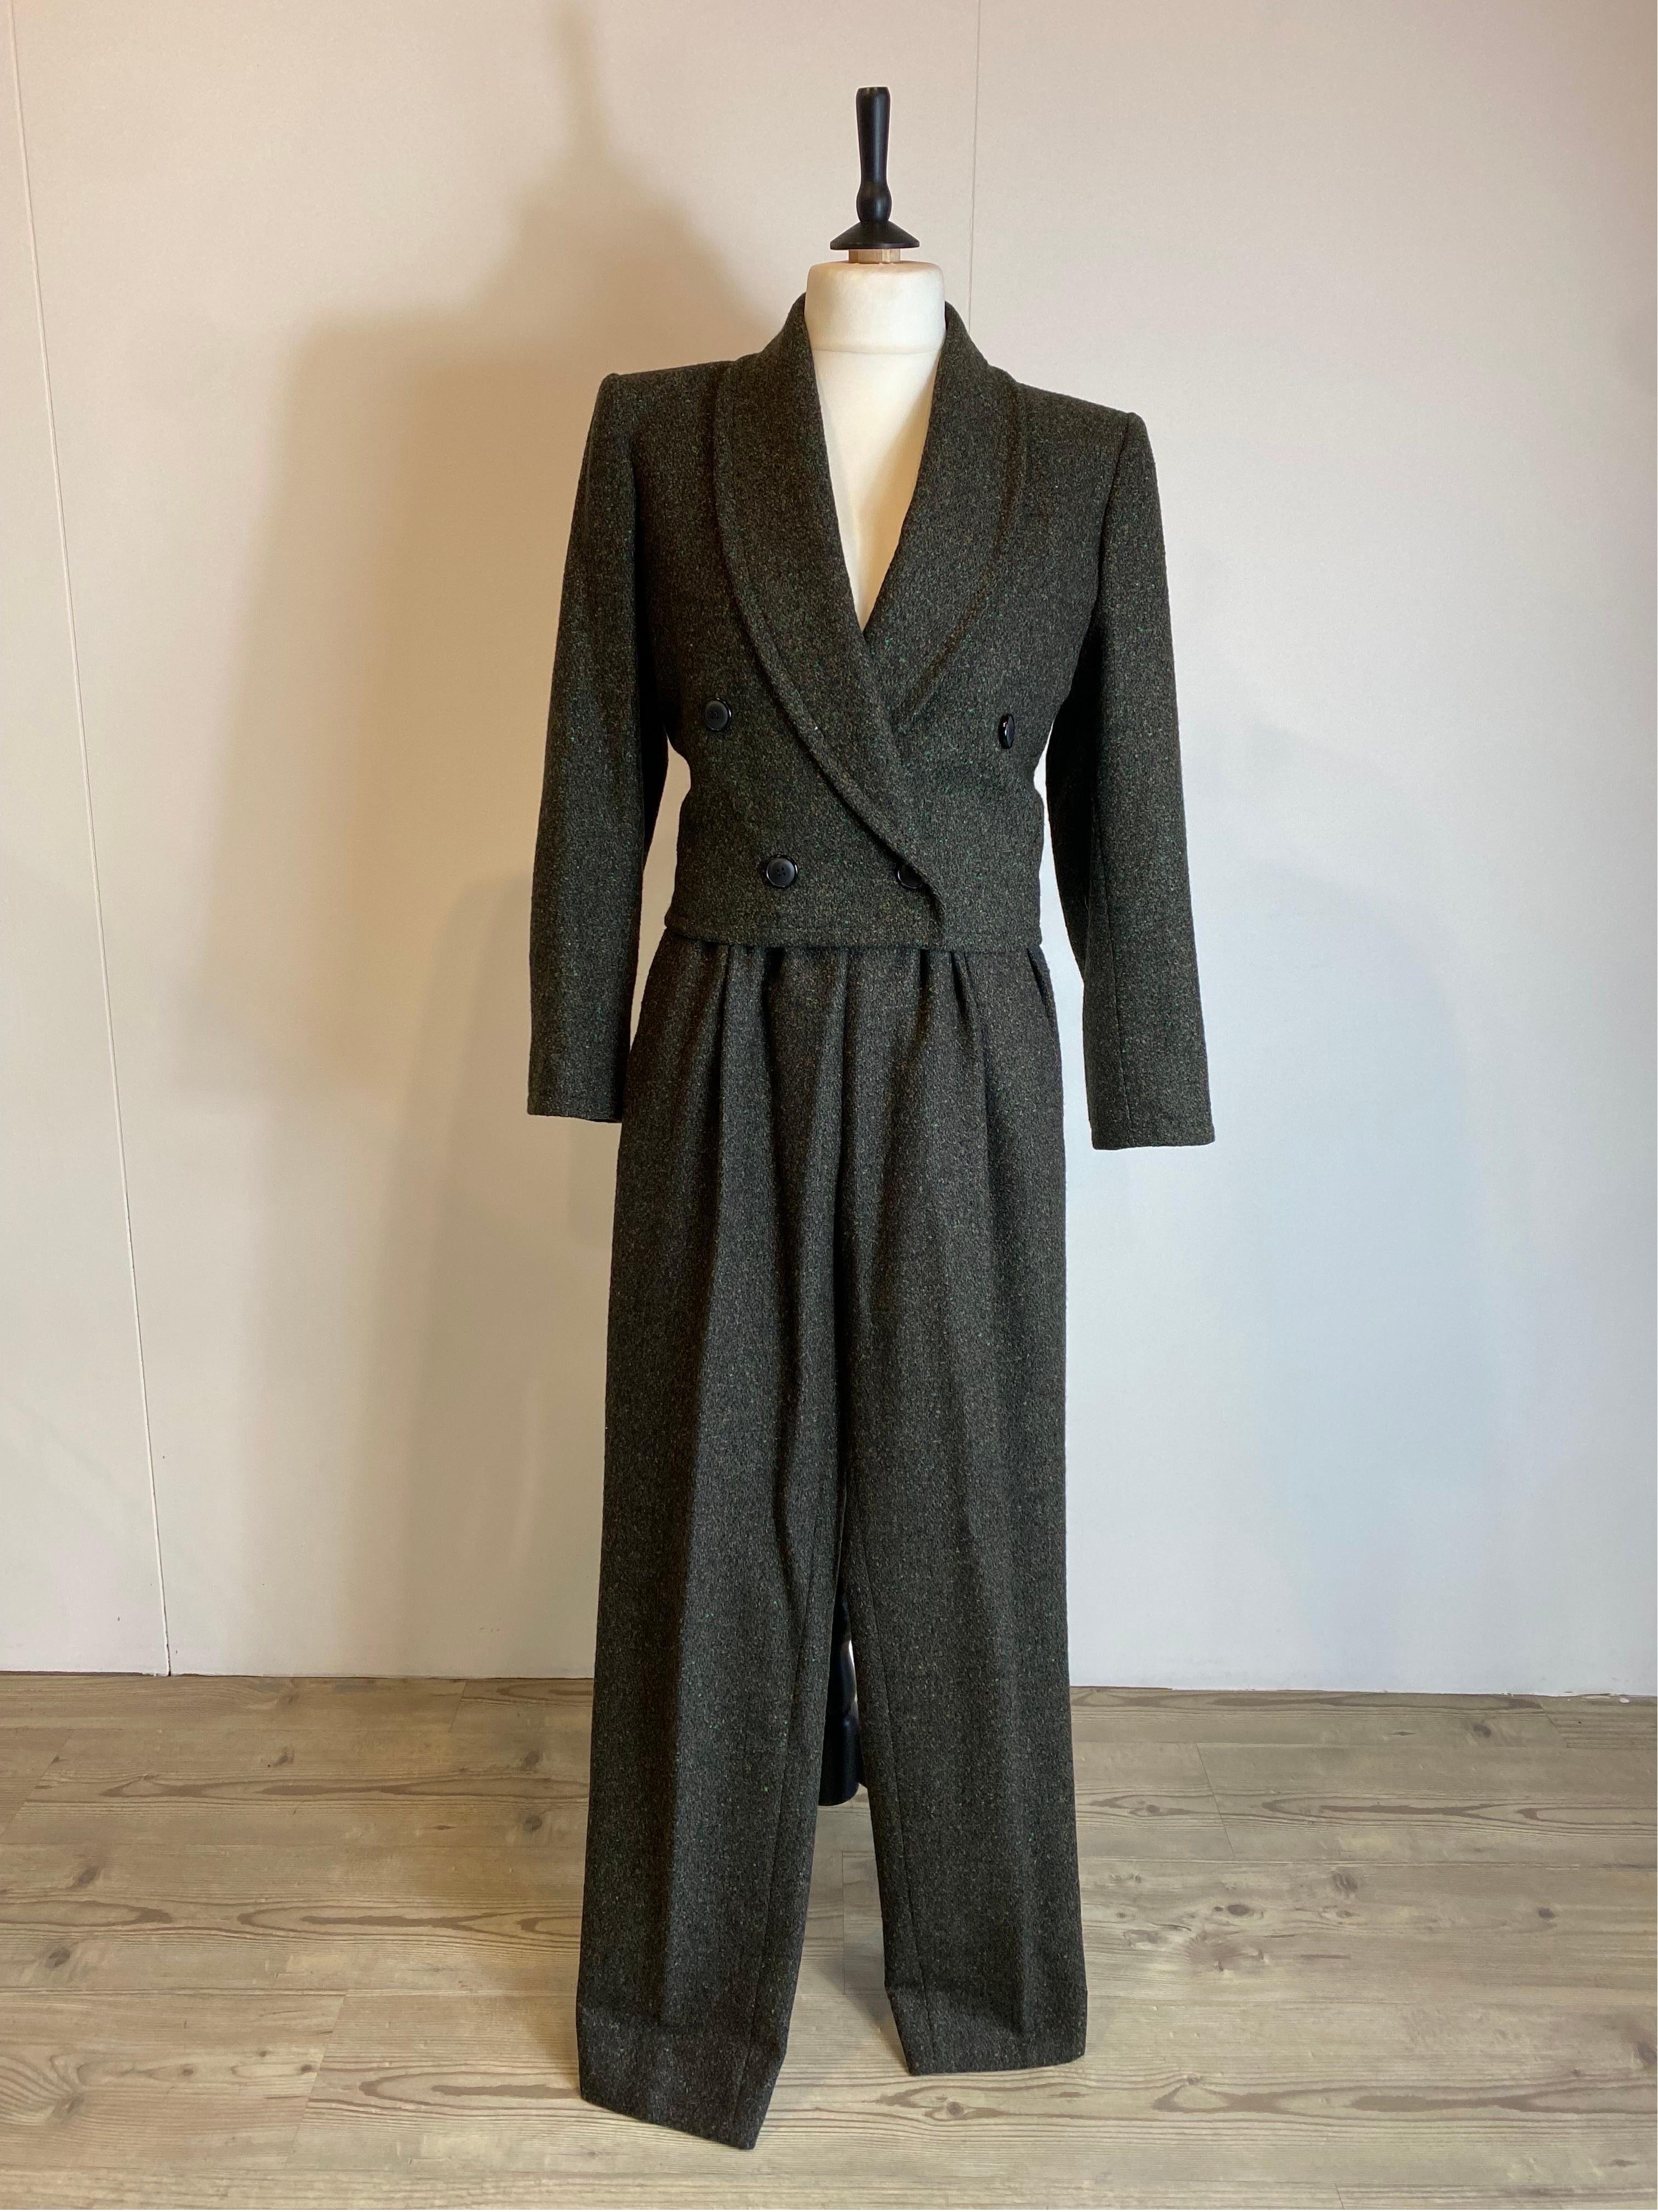 Vintage Saint Laurent suit.
Made of wool in shades of green. Lined.
Features padded shoulders.
French size 38 which corresponds to an Italian 42.
The jacket measures:
Shoulders 42 cm
Bust 46 cm
Length 55 cm
The trousers measure
Waist 33 cm
Leg